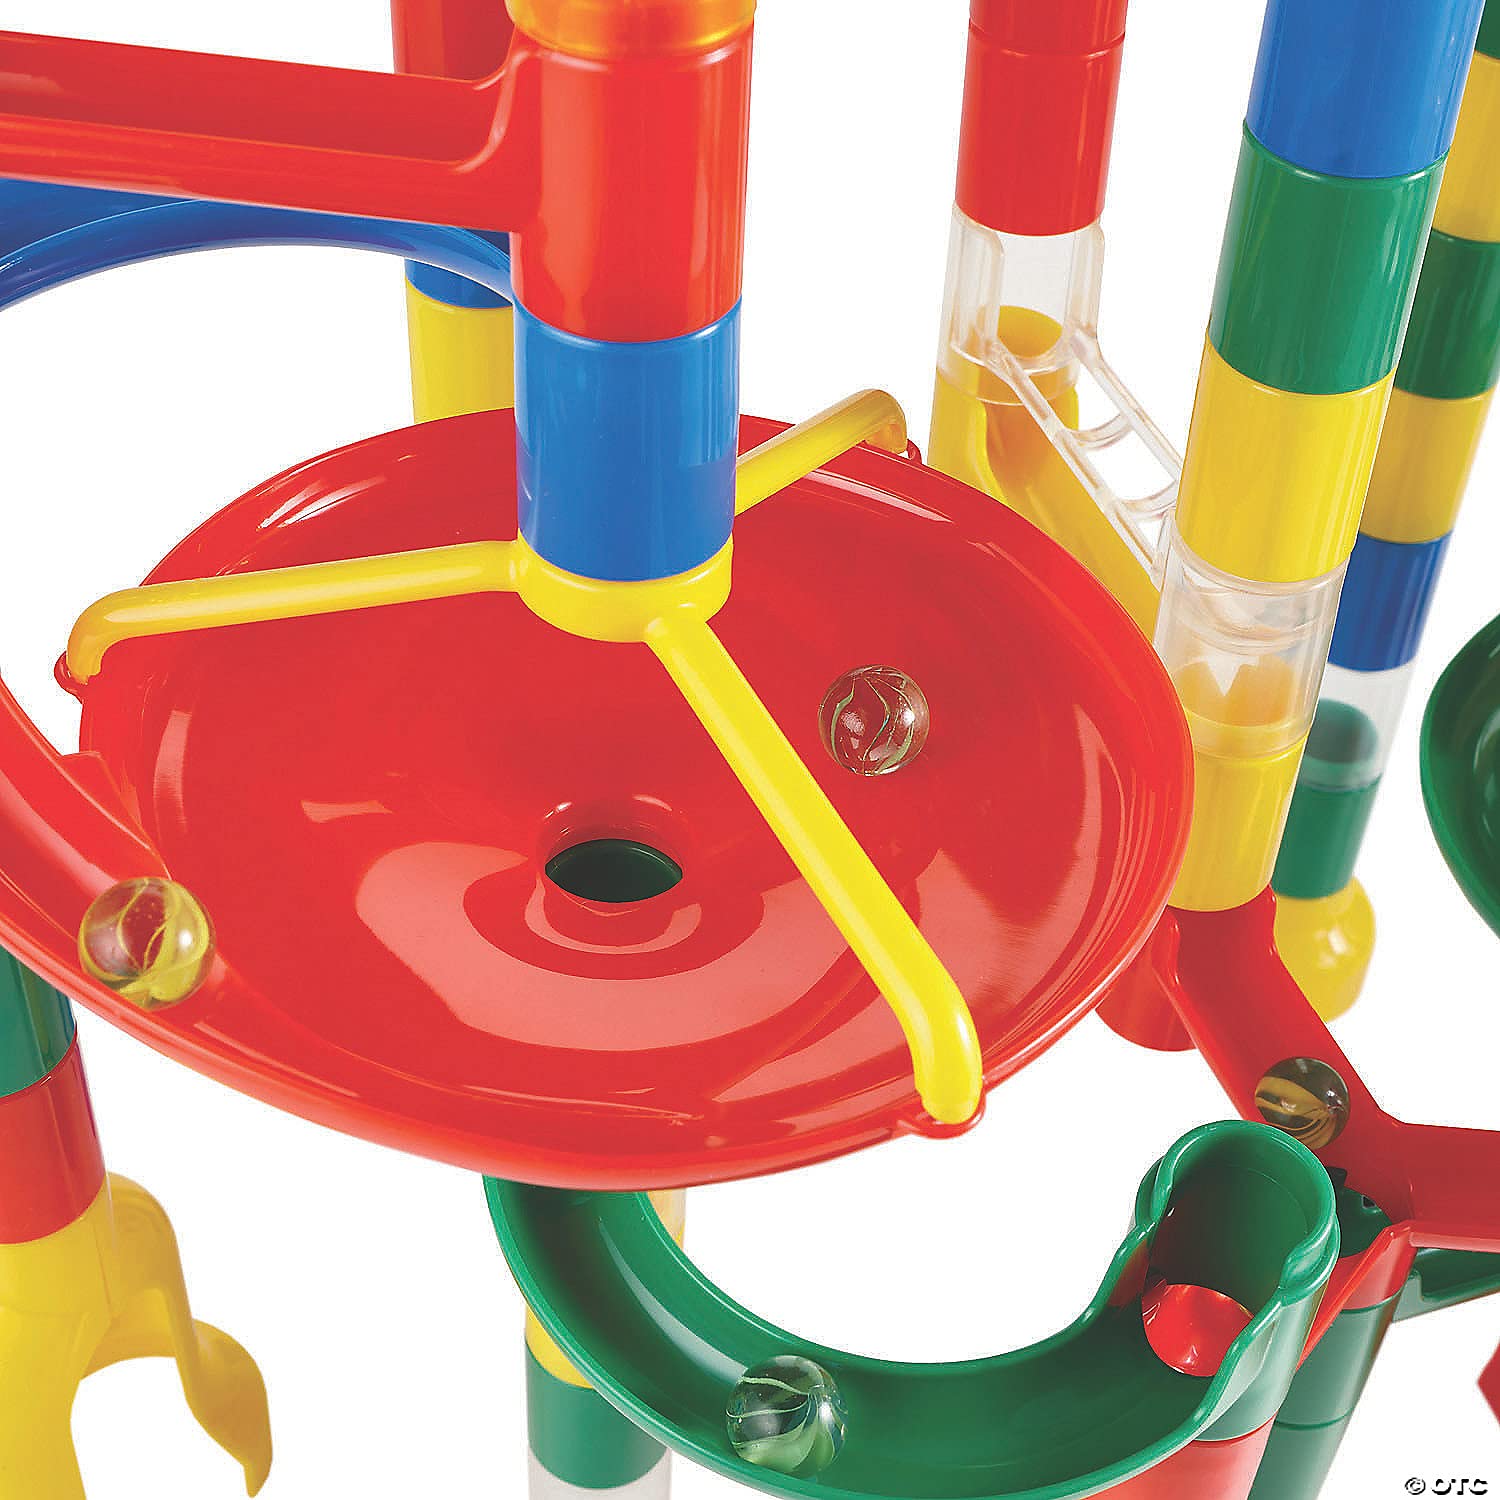 Marble Run: 123 Piece Set (103 Durable Pieces and 20 Marbles) Exclusively at MINDWARE!